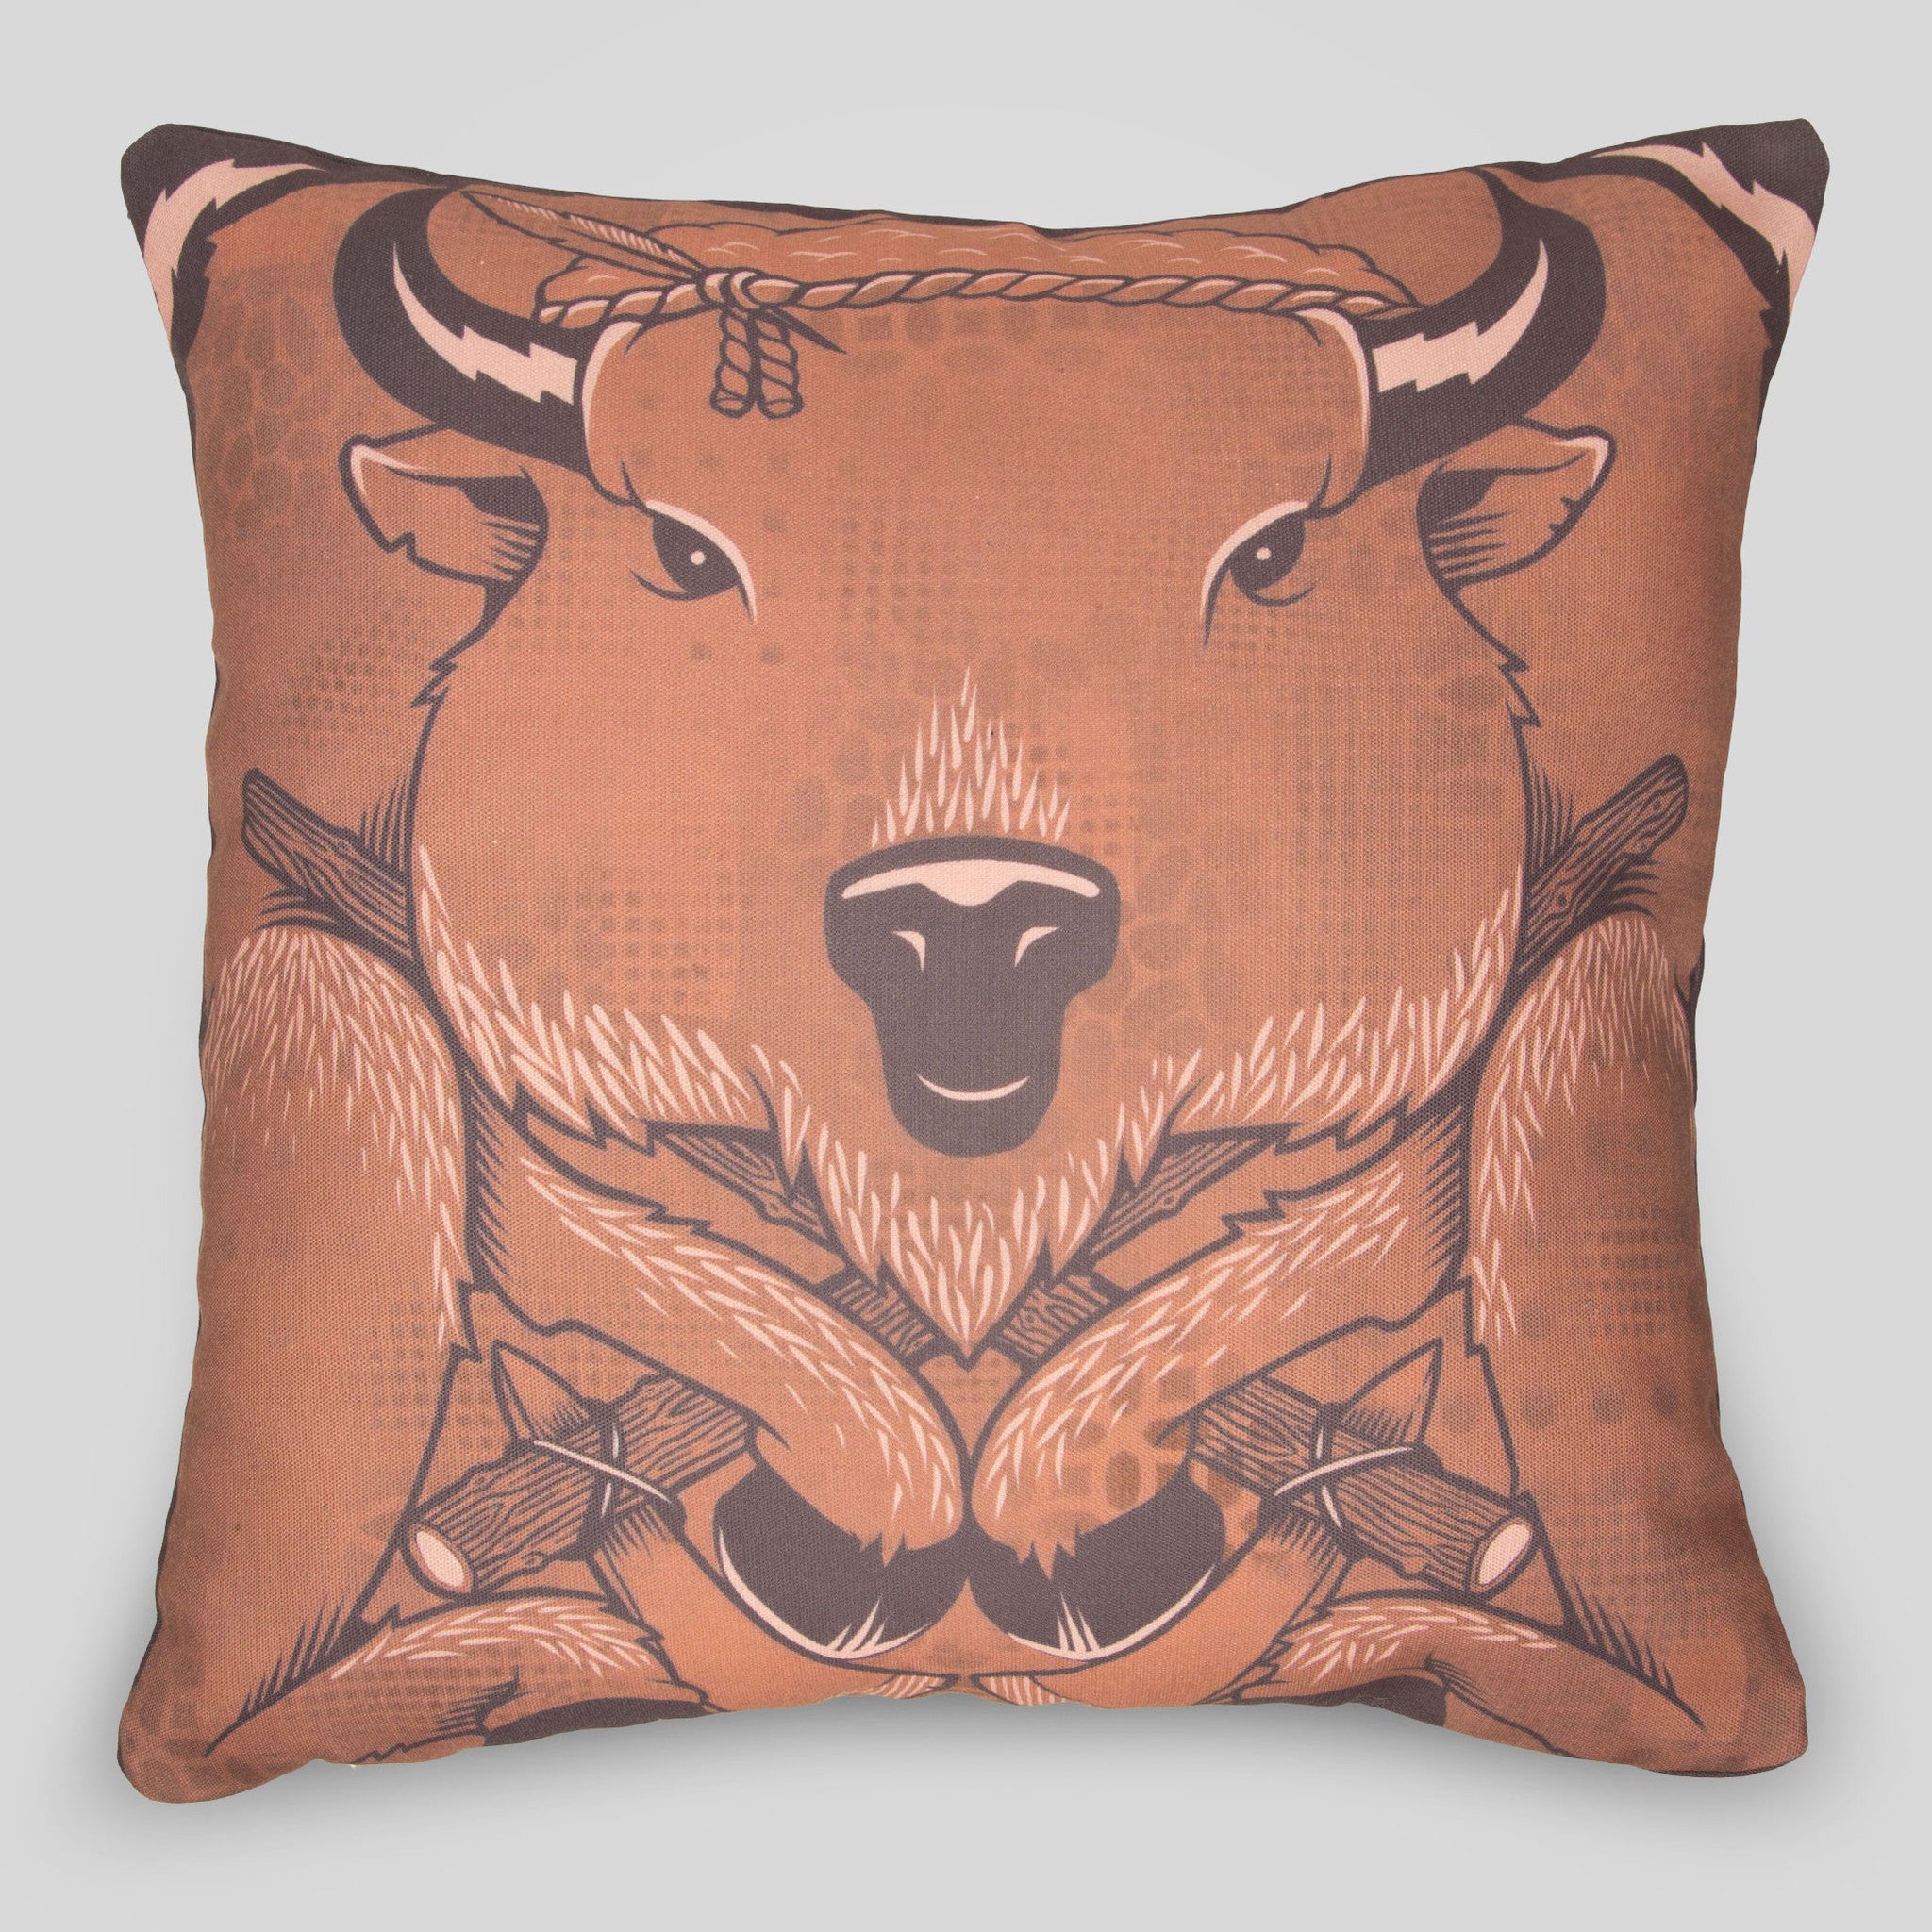 The Bison Pillow Cover by Jeremy Fish